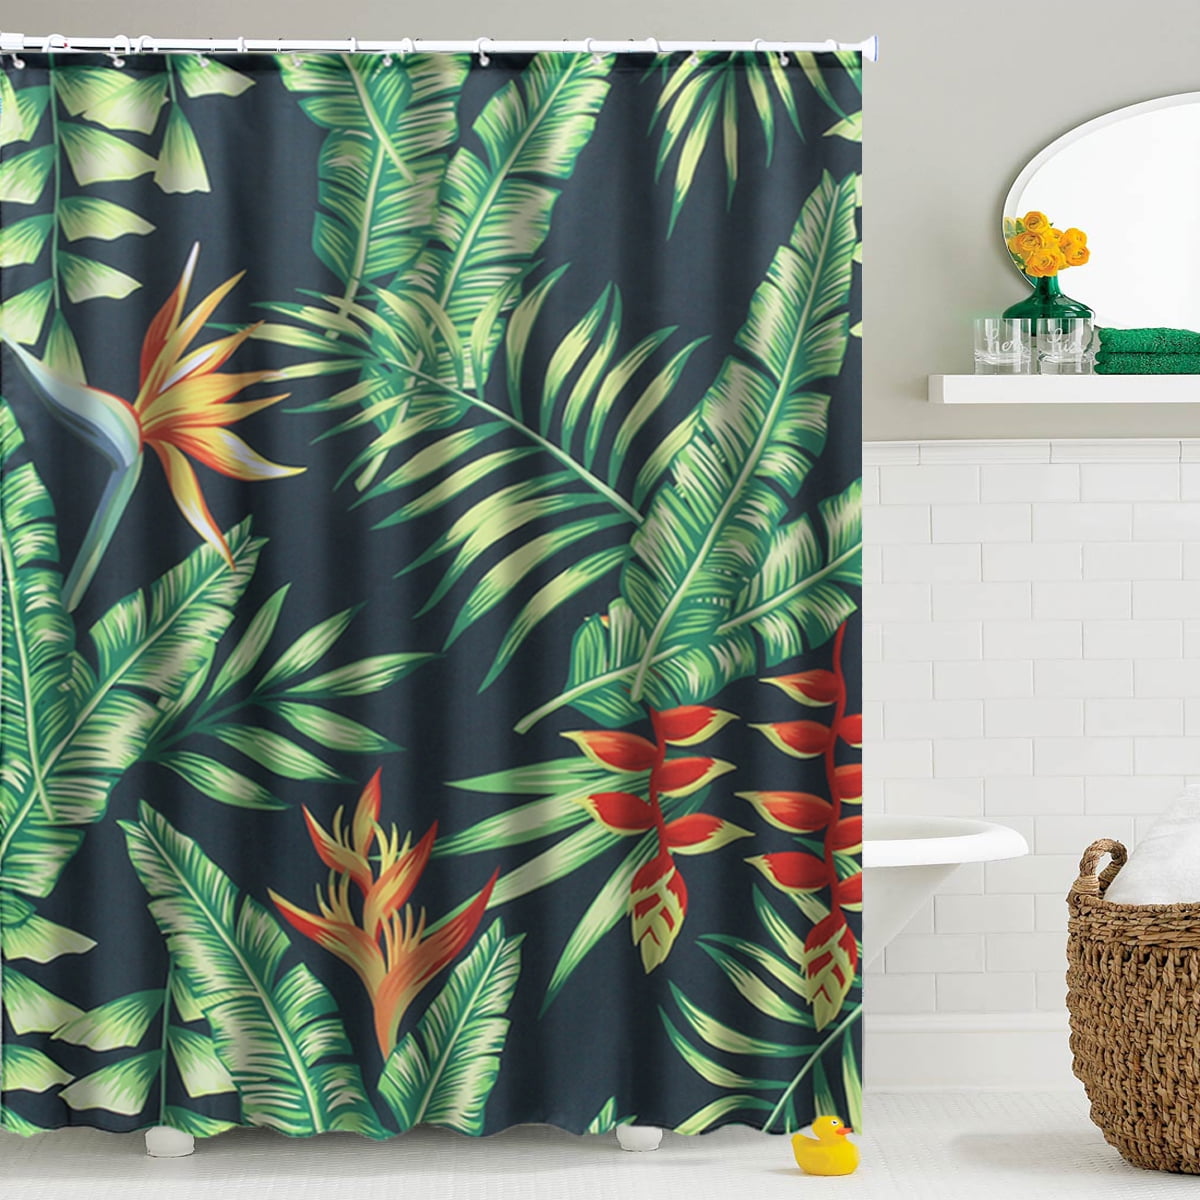 Tropical jungle Shower Curtain Bedroom Waterproof Fabric & 12hook 71*71inch new 